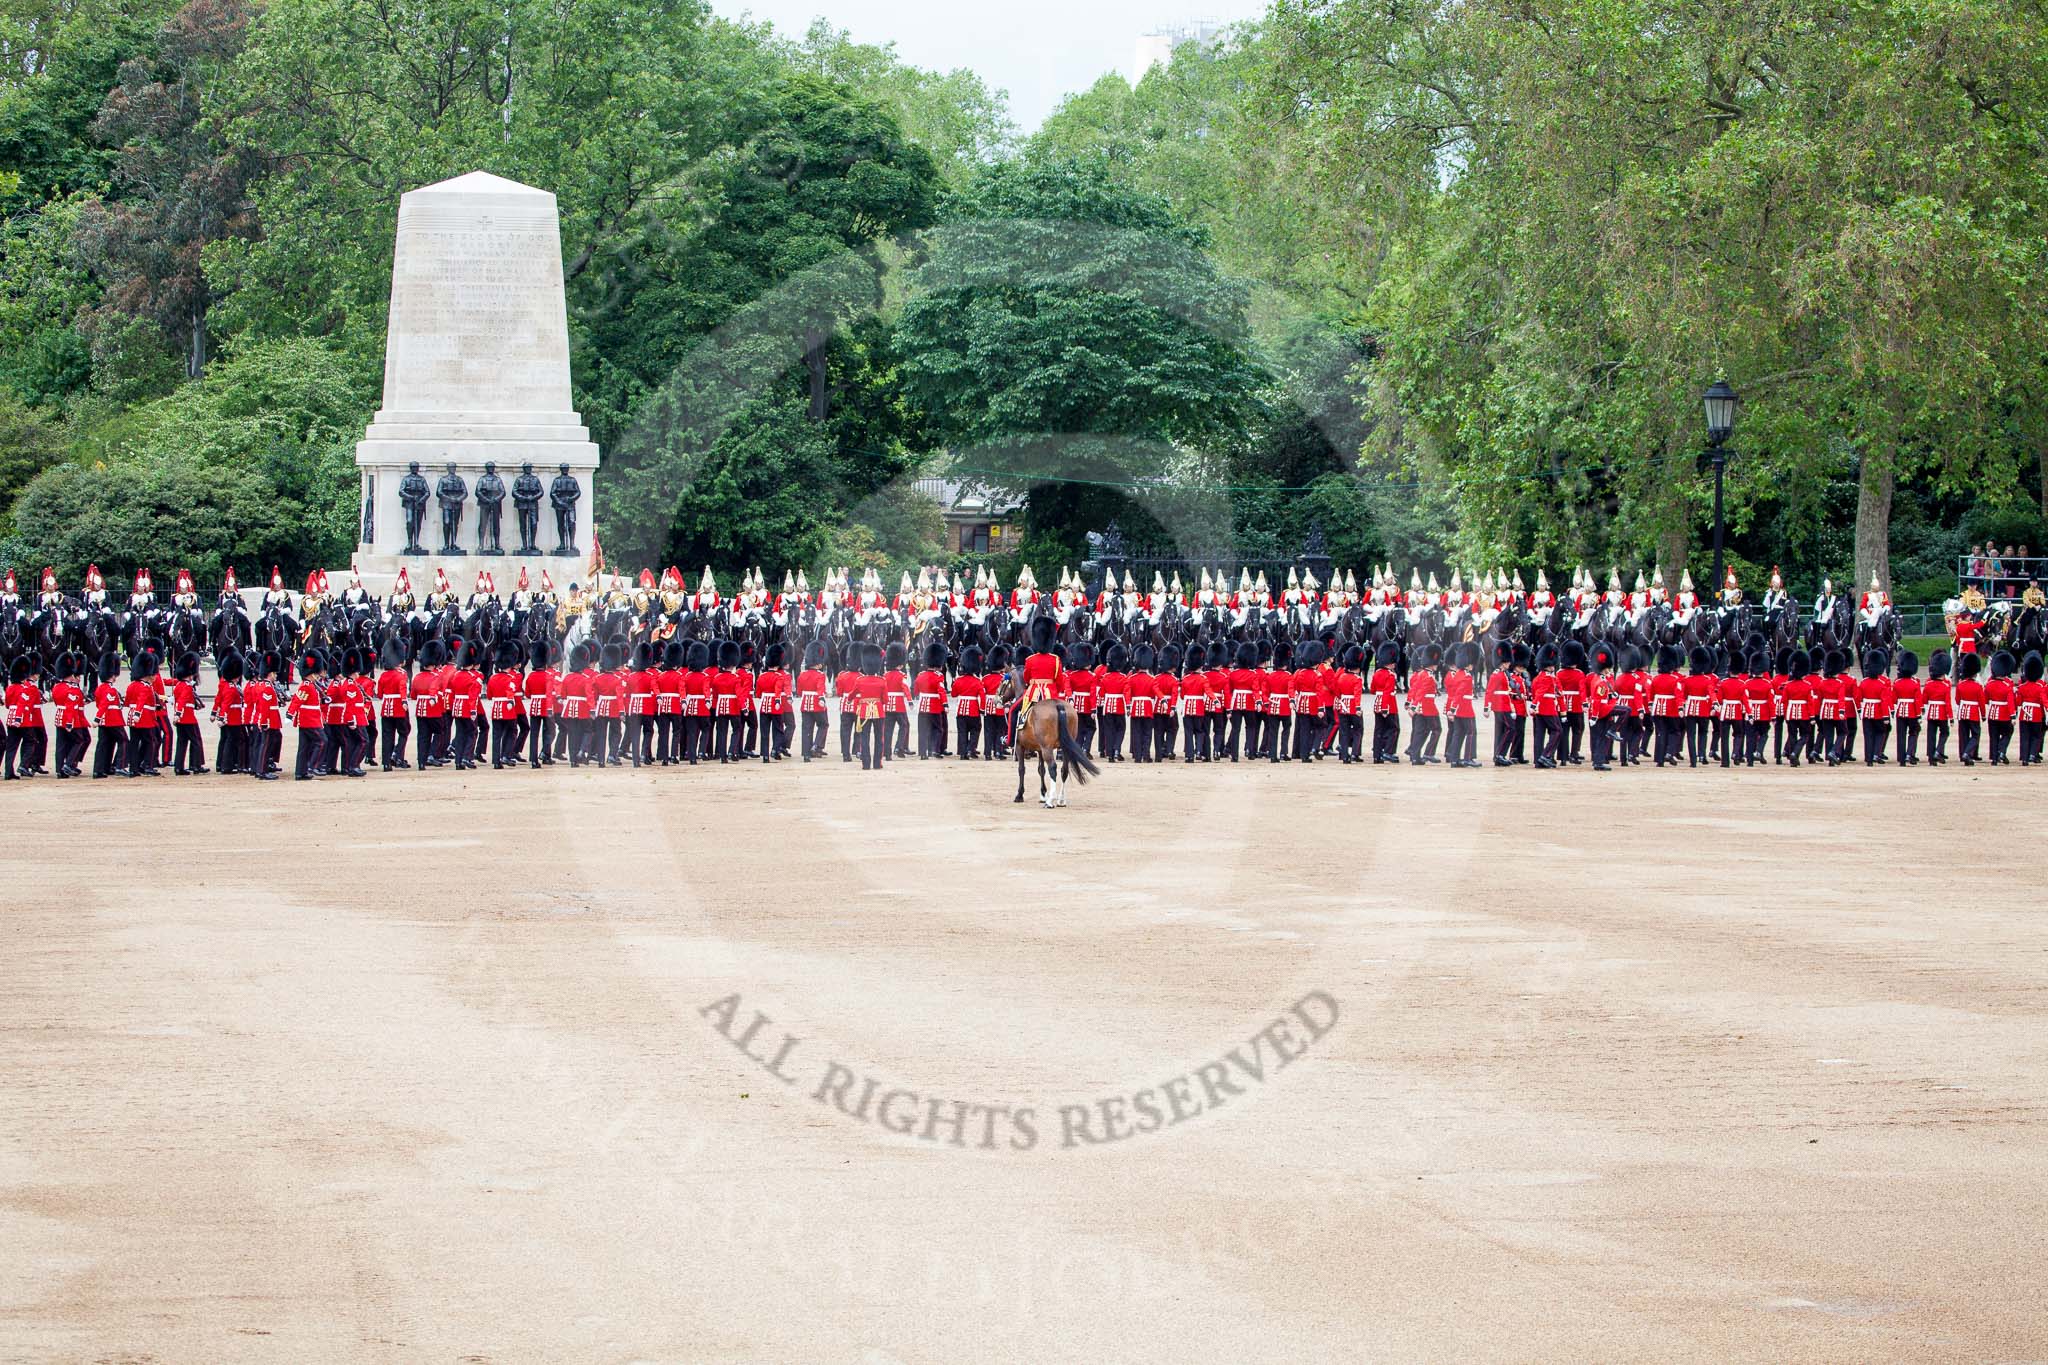 Trooping the Colour 2012: All the guardsmen turn 90 degrees to the right, and then march forward to form individual divisions..
Horse Guards Parade, Westminster,
London SW1,

United Kingdom,
on 16 June 2012 at 11:30, image #367